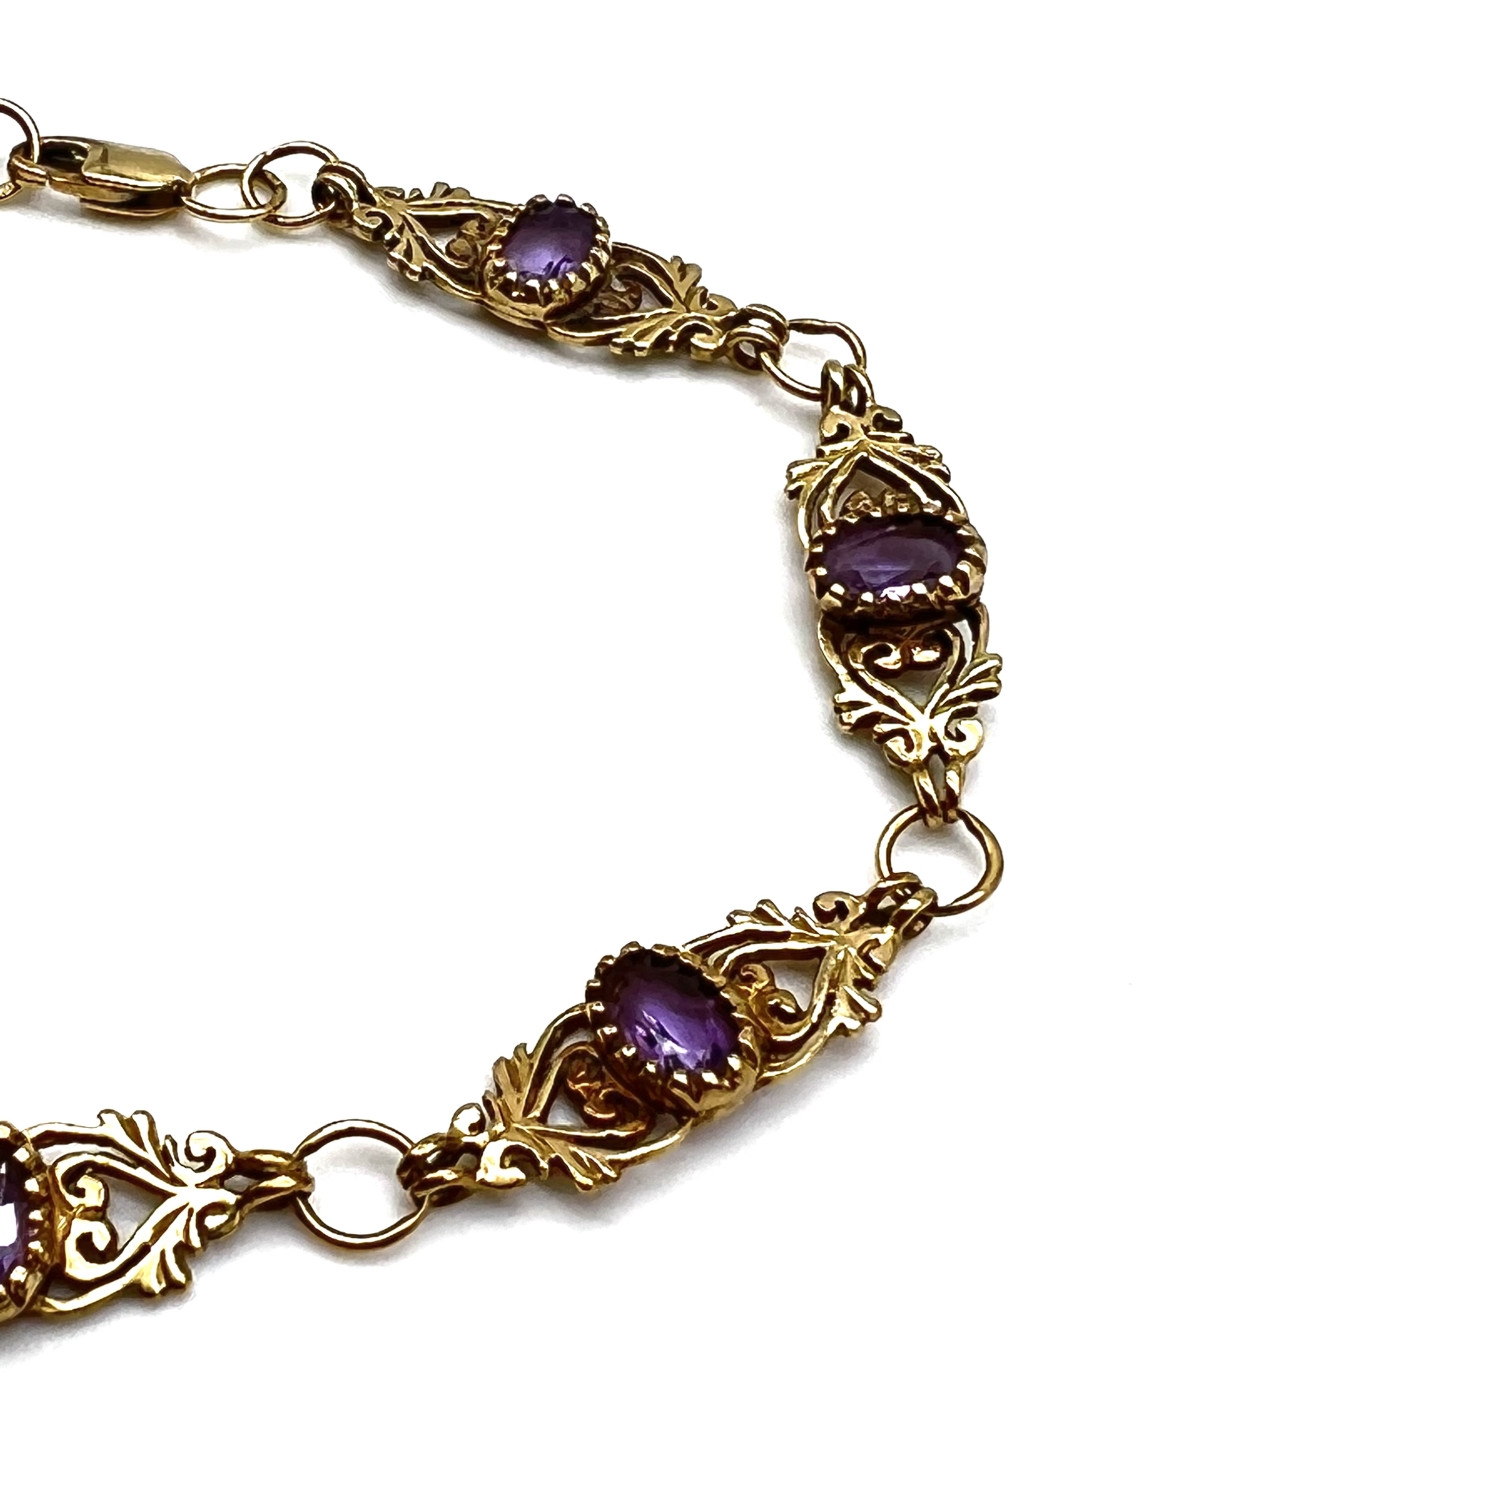 Fine 9ct gold and amethyst bracelet. Marked for 9ct gold and set with amethyst stones. Measures 19. - Image 3 of 5